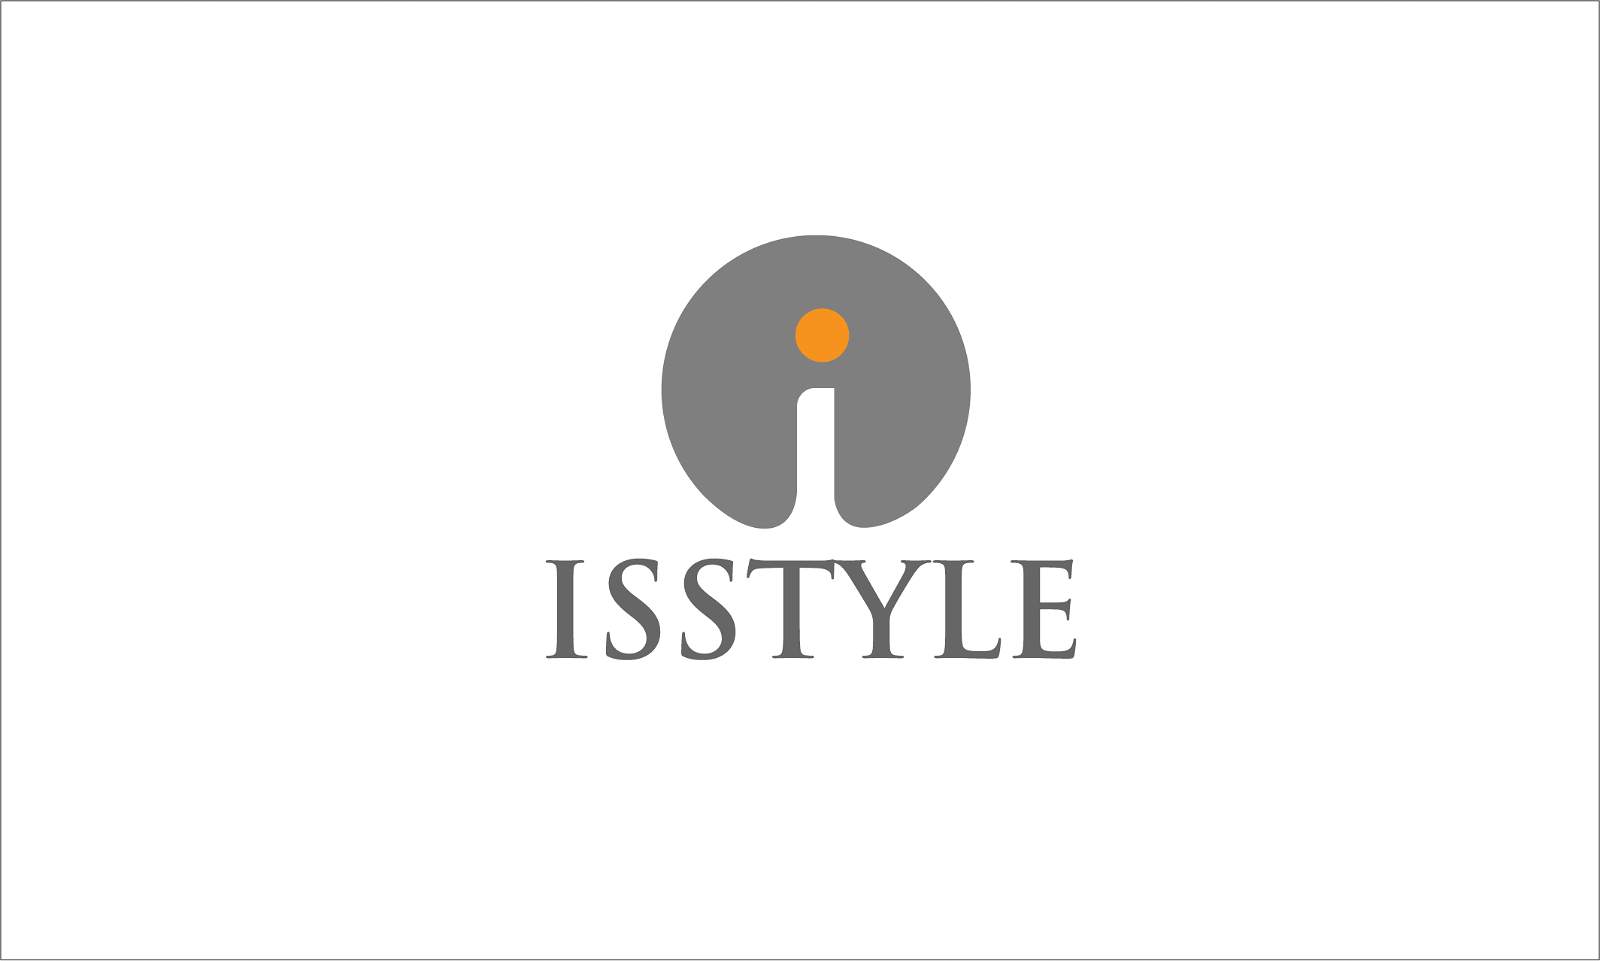 Isstyle.com - Creative brandable domain for sale